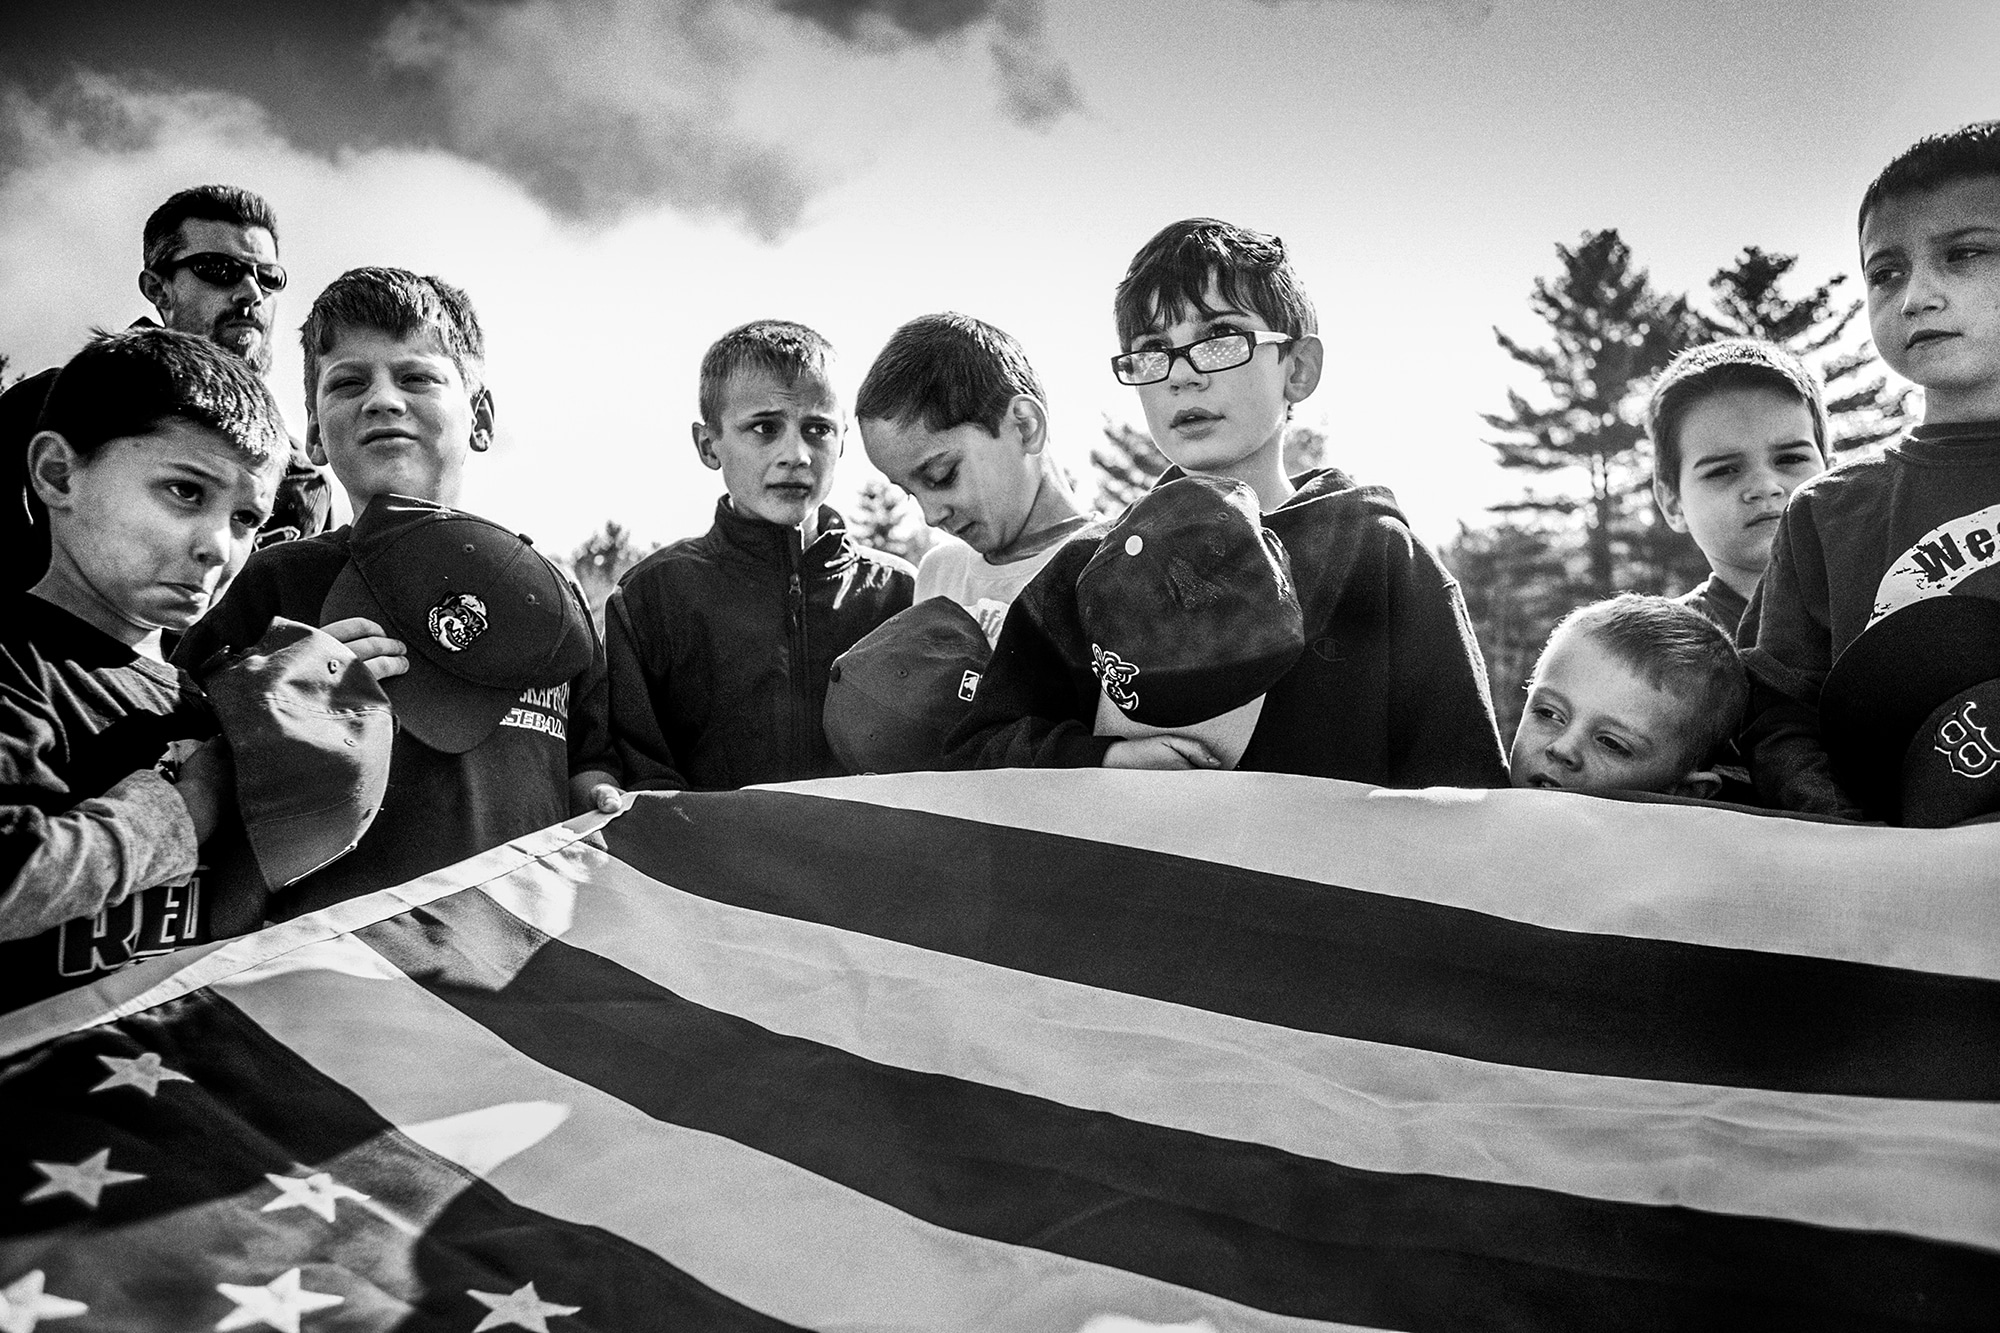 Opening Day - 2015 "This is opening day for little league. The kids are gathered and are to hold the American Flag while The American Anthem is played. I love the disparity of expressions on these boys faces. One is incredibly attentive, while the rest just are goofing off and holding on for dear life until it's over!" 